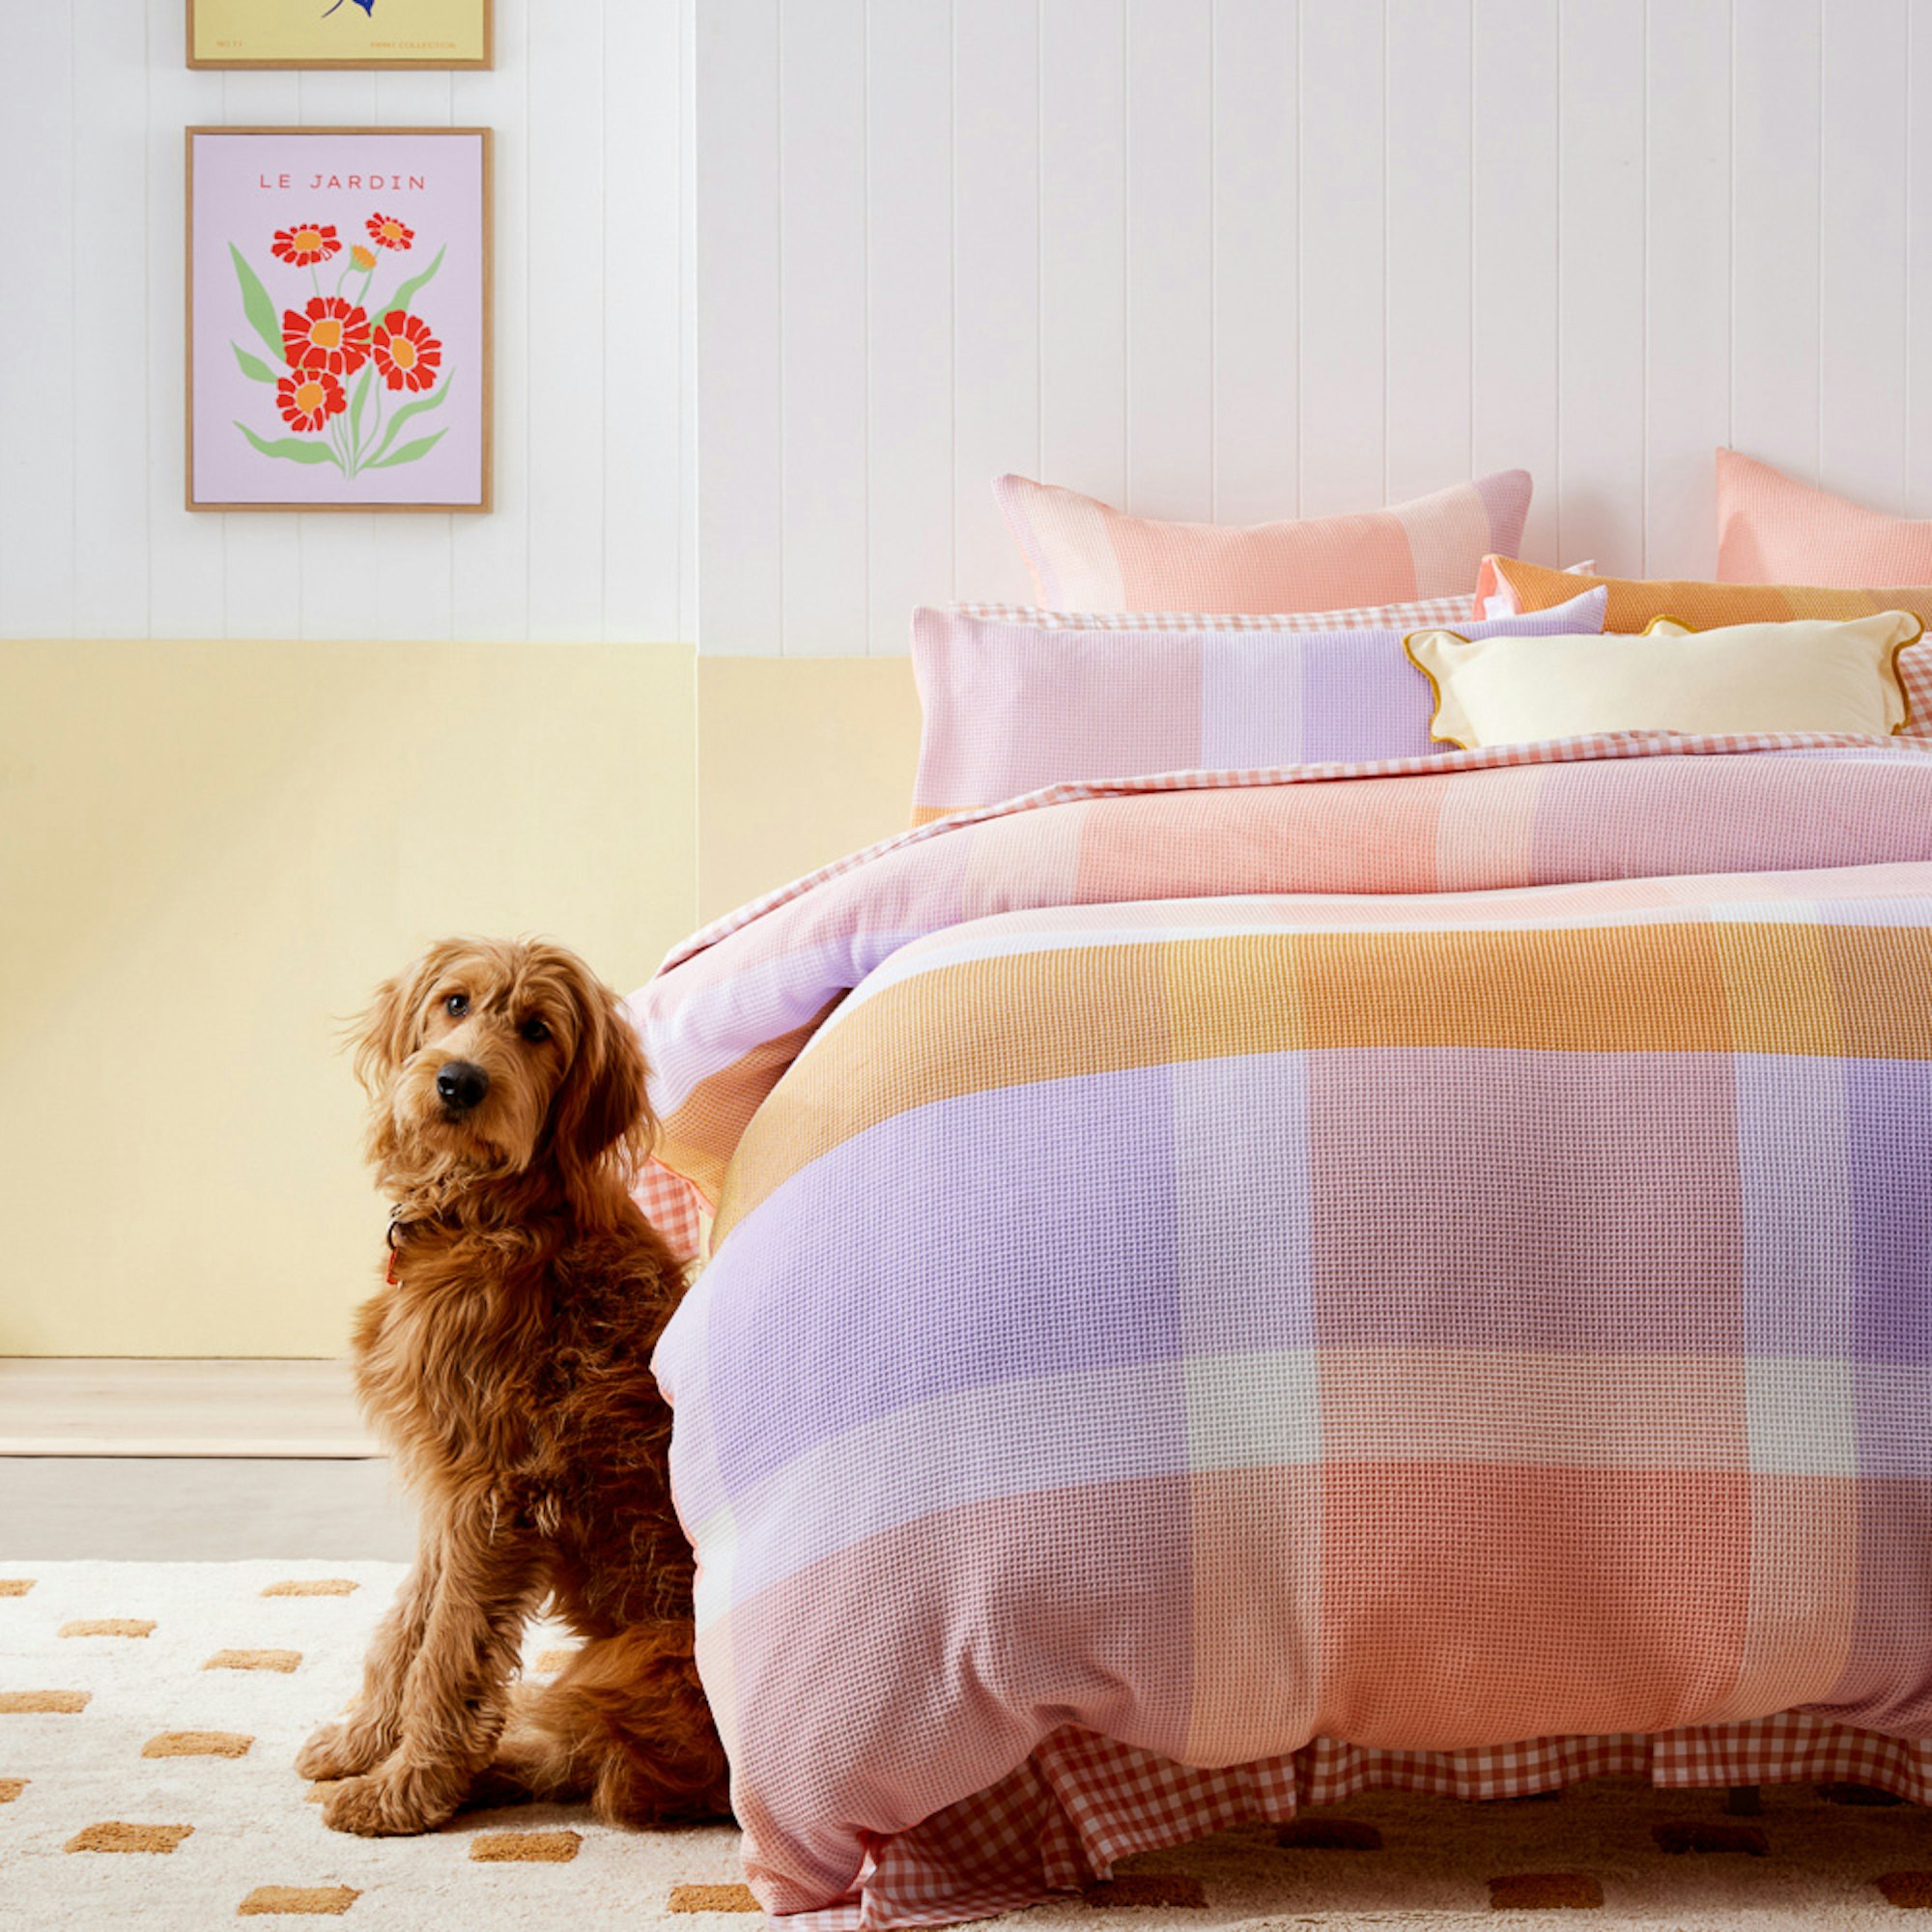 Pastel coloured gingham quilt cover set layered with cushion and brown dog sitting by the side of the bed.